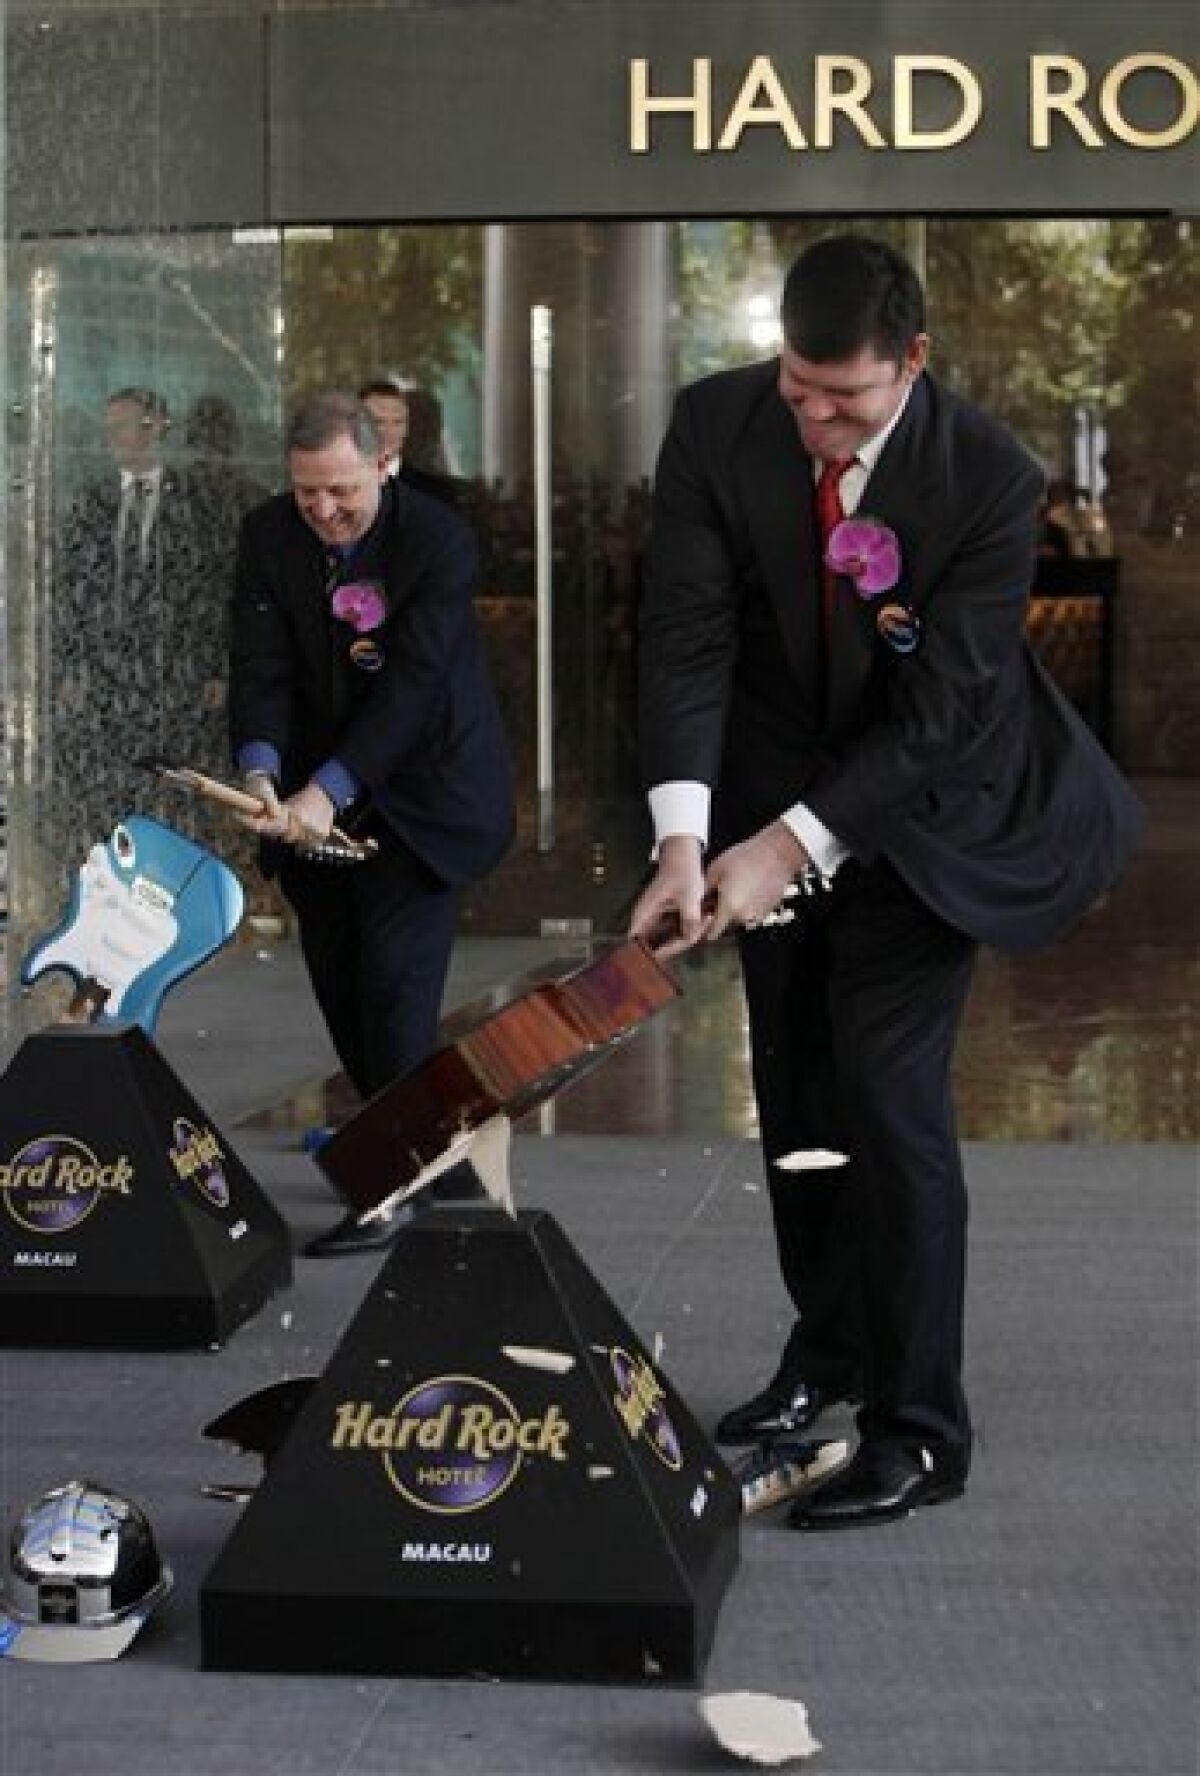 James Packer, right, co-chairman and a director of Melco Crown Entertainment, smashes a guitar during the opening ceremony of the Hard Rock Hotel at the City of Dreams, one of the giant casino complex in Macau, Monday, June 1, 2009. City of Dreams is an urban entertainment resort, feature a 420,000 square foot casino with an underwater theme. It's offer more than 500 gaming tables and 1,350 gaming machines. (AP Photo/Kin Cheung)